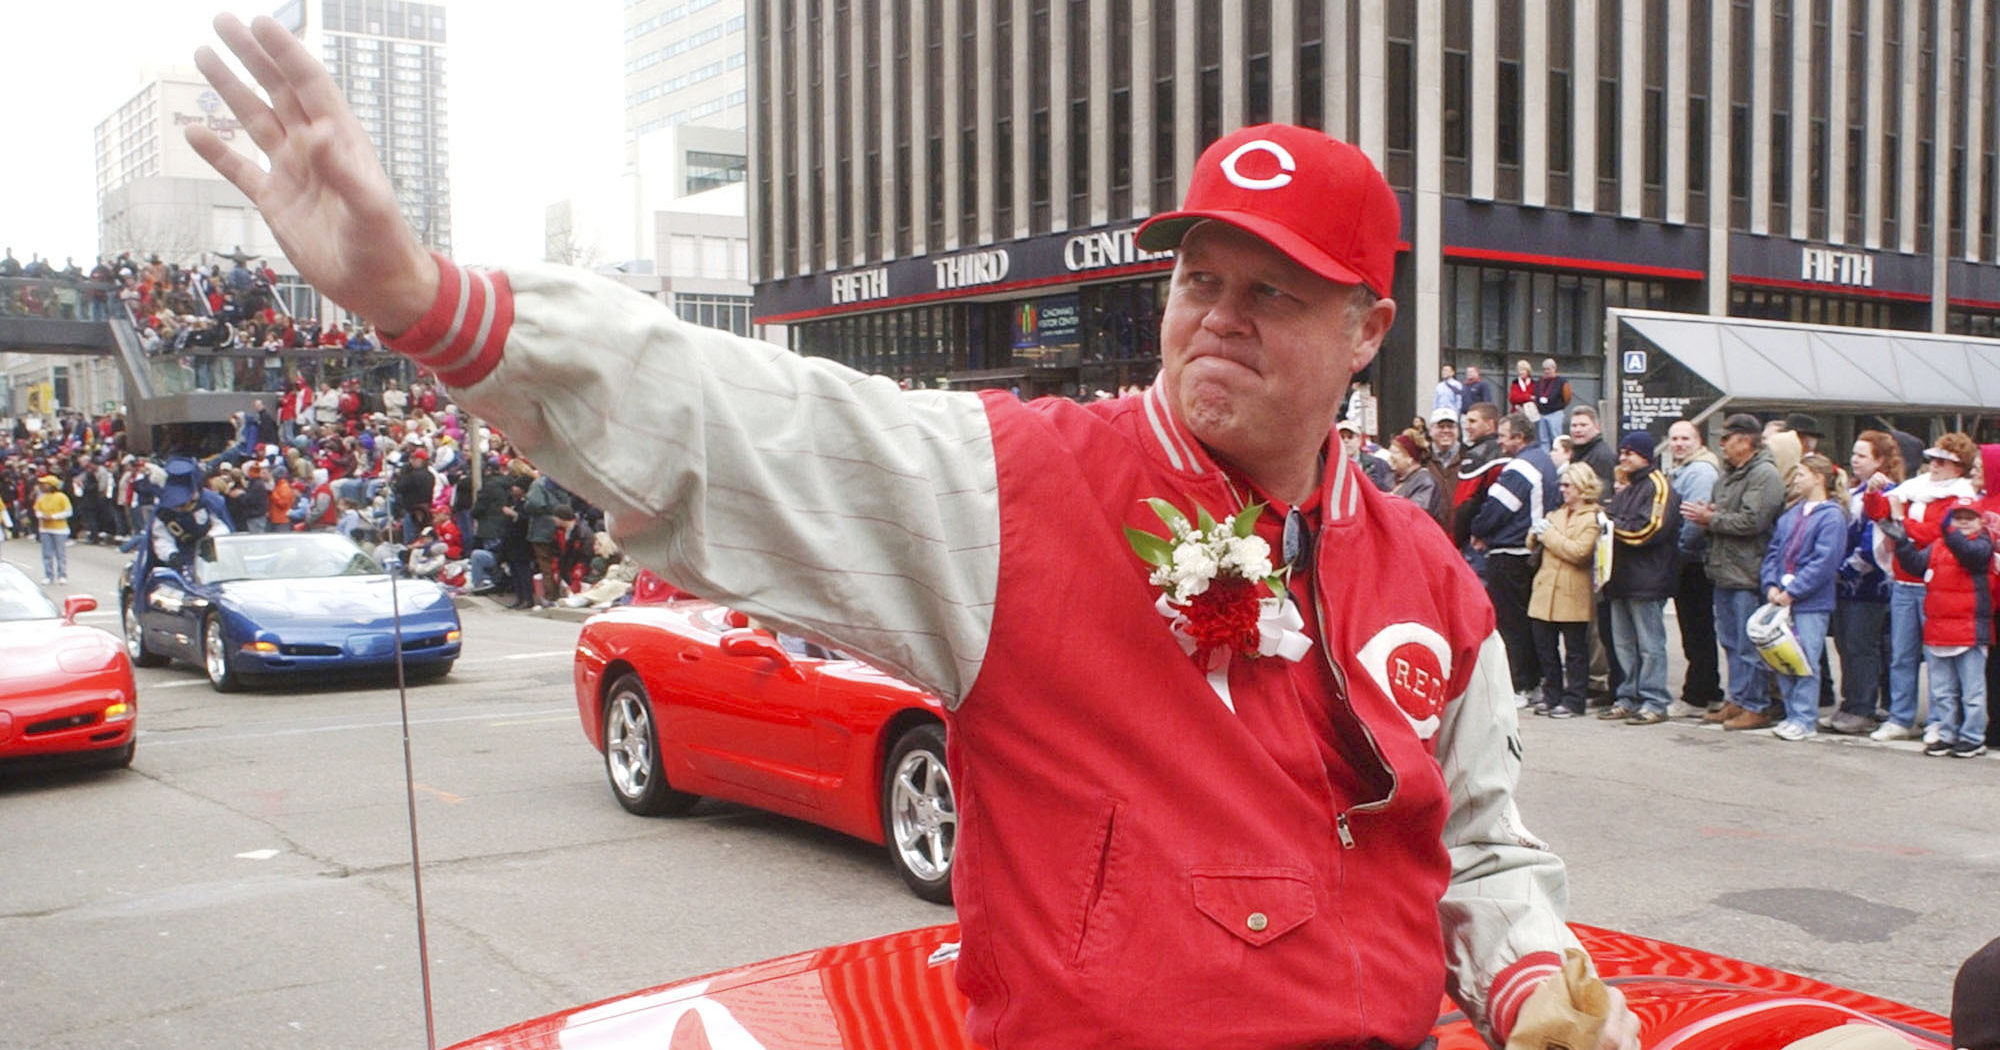 Former Cincinnati Reds pitcher Tom Browning waves during the Findlay Market Parade through downtown Cincinnati on March 31, 2003.